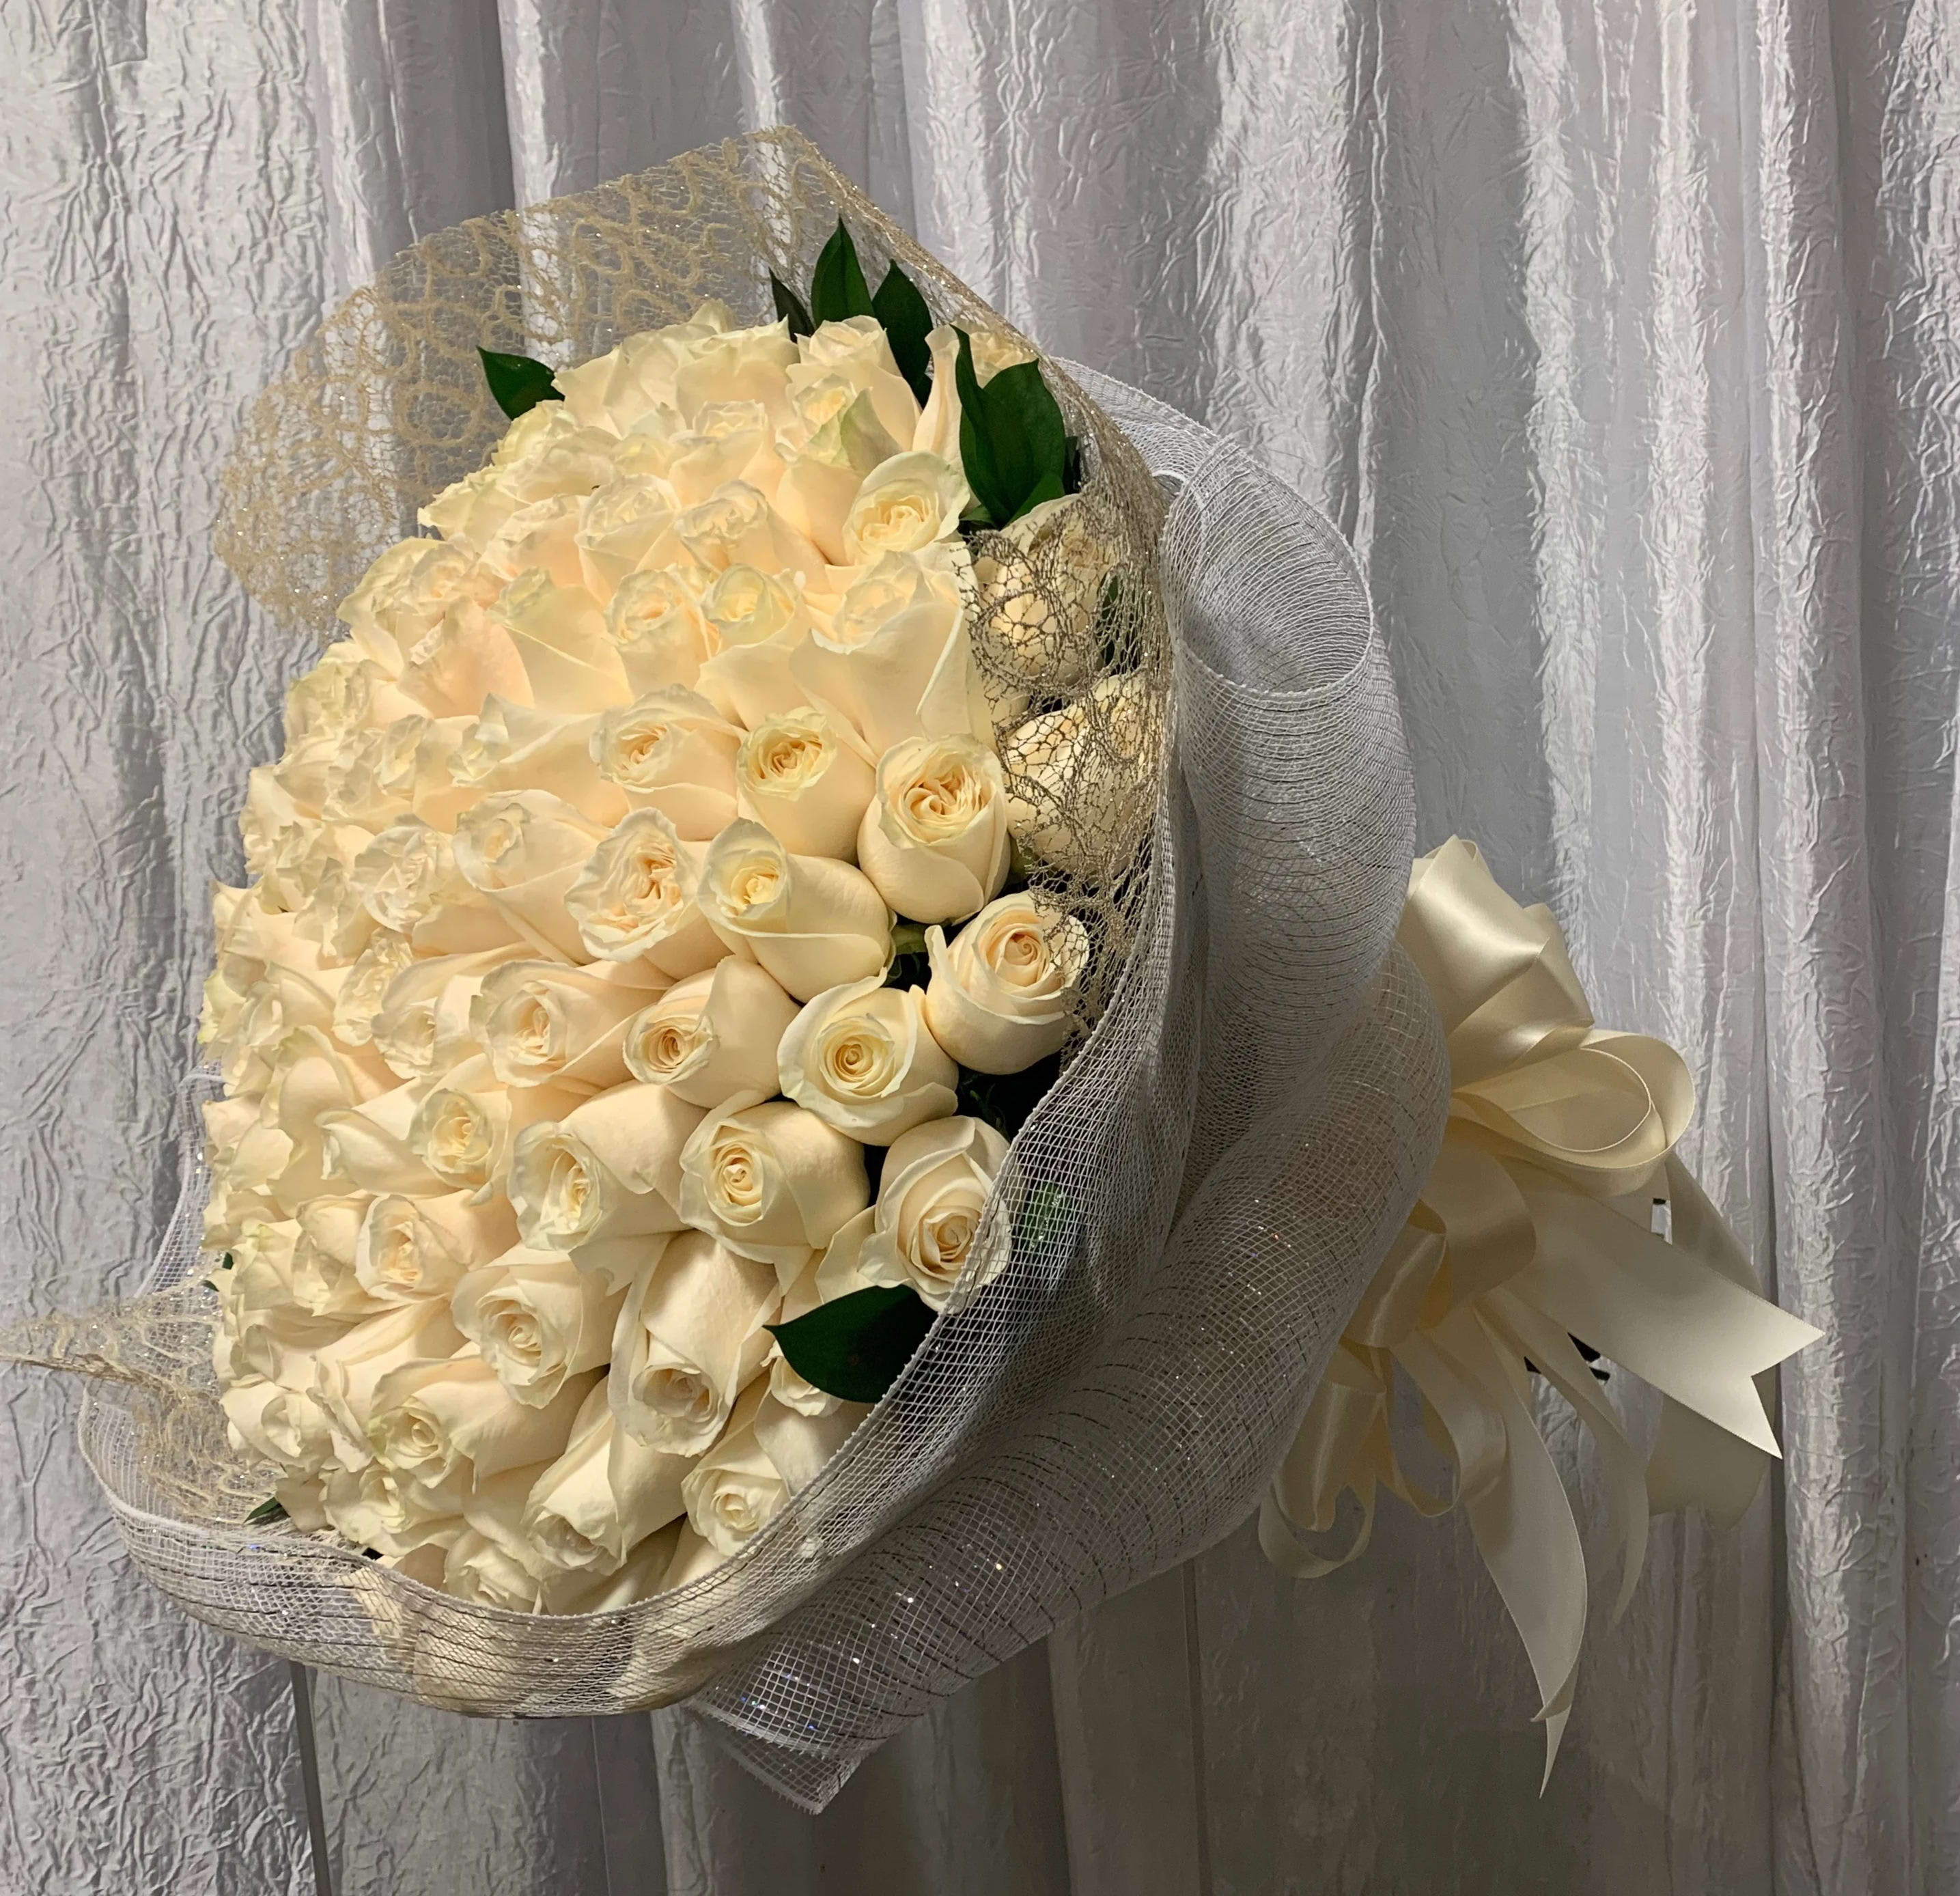 100 White Roses Bouquet in Los Angeles, CA